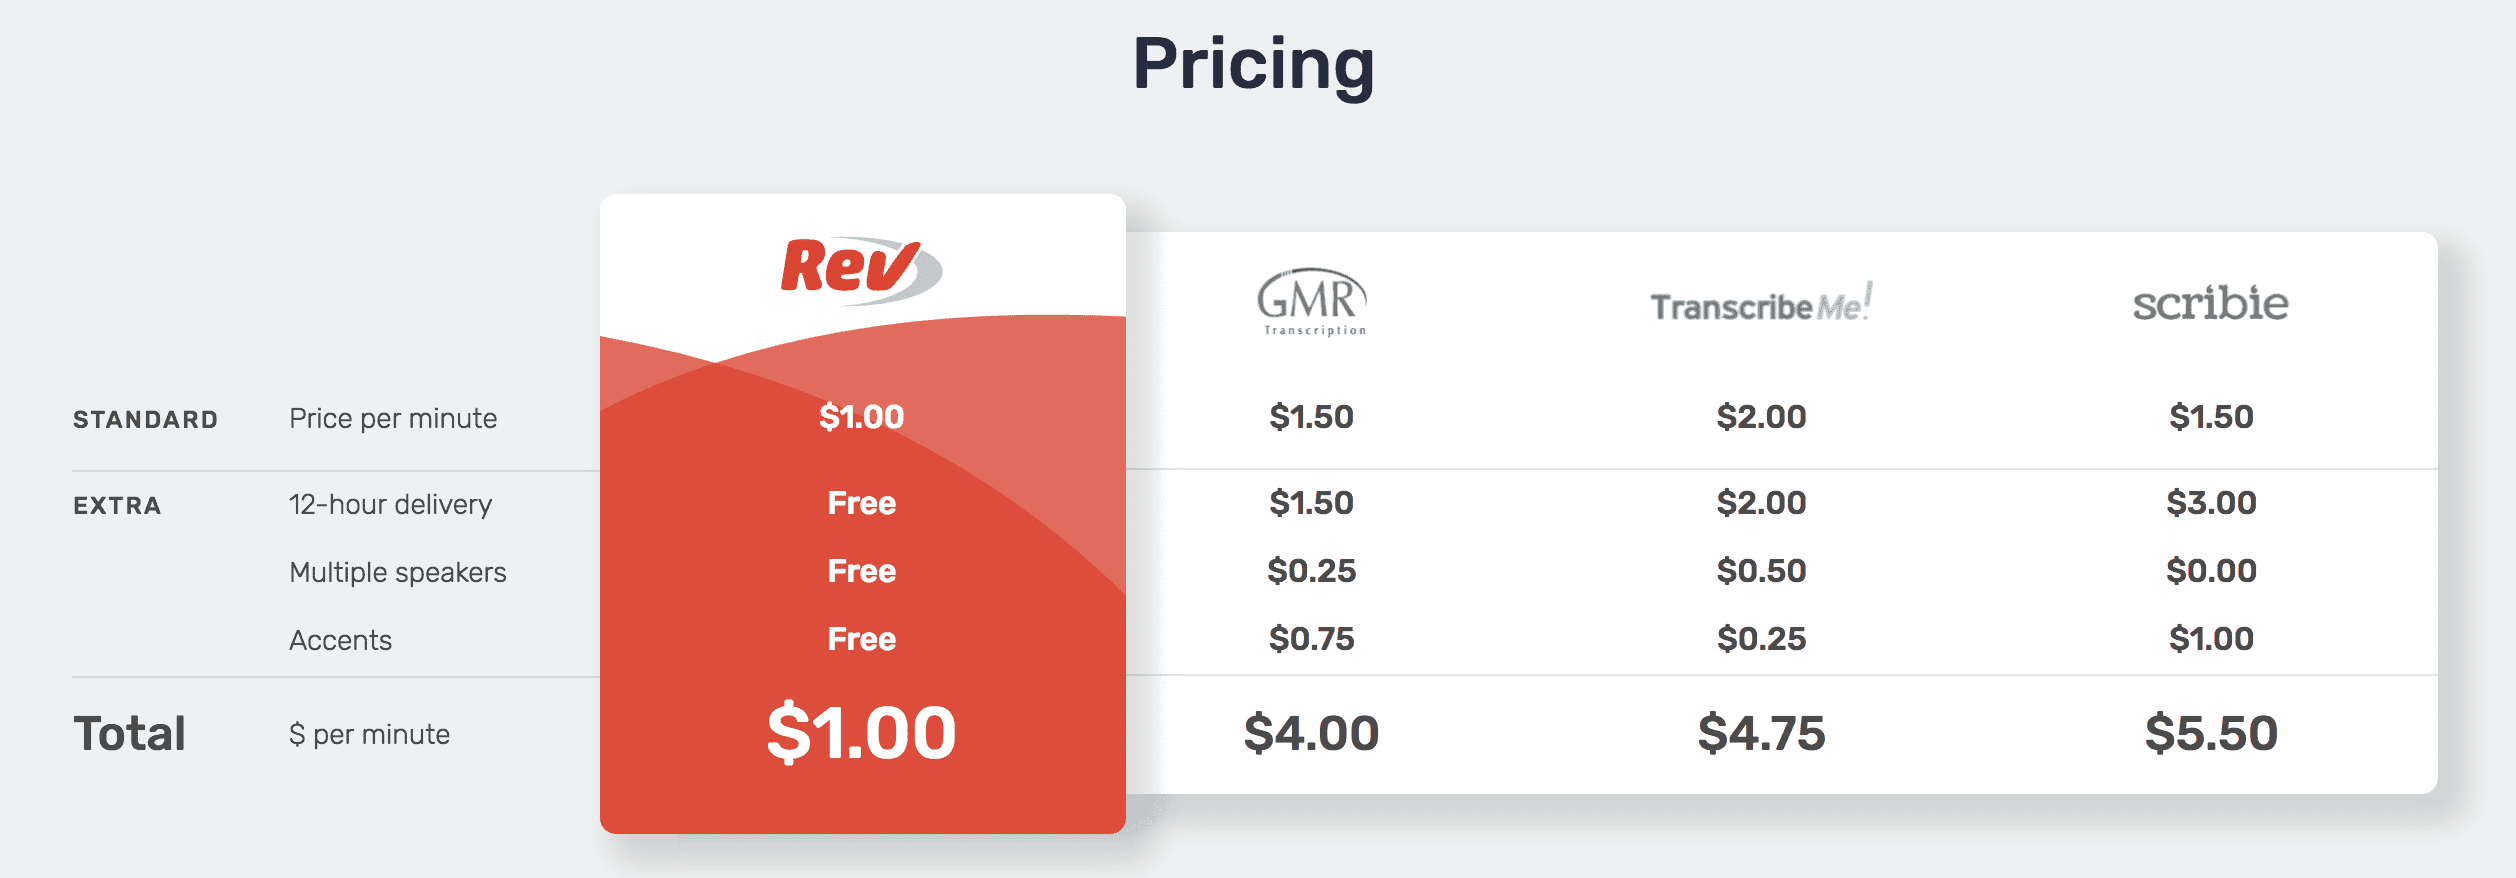 table of rev transcription pricing compared to GMR, transcribeMe and scribie